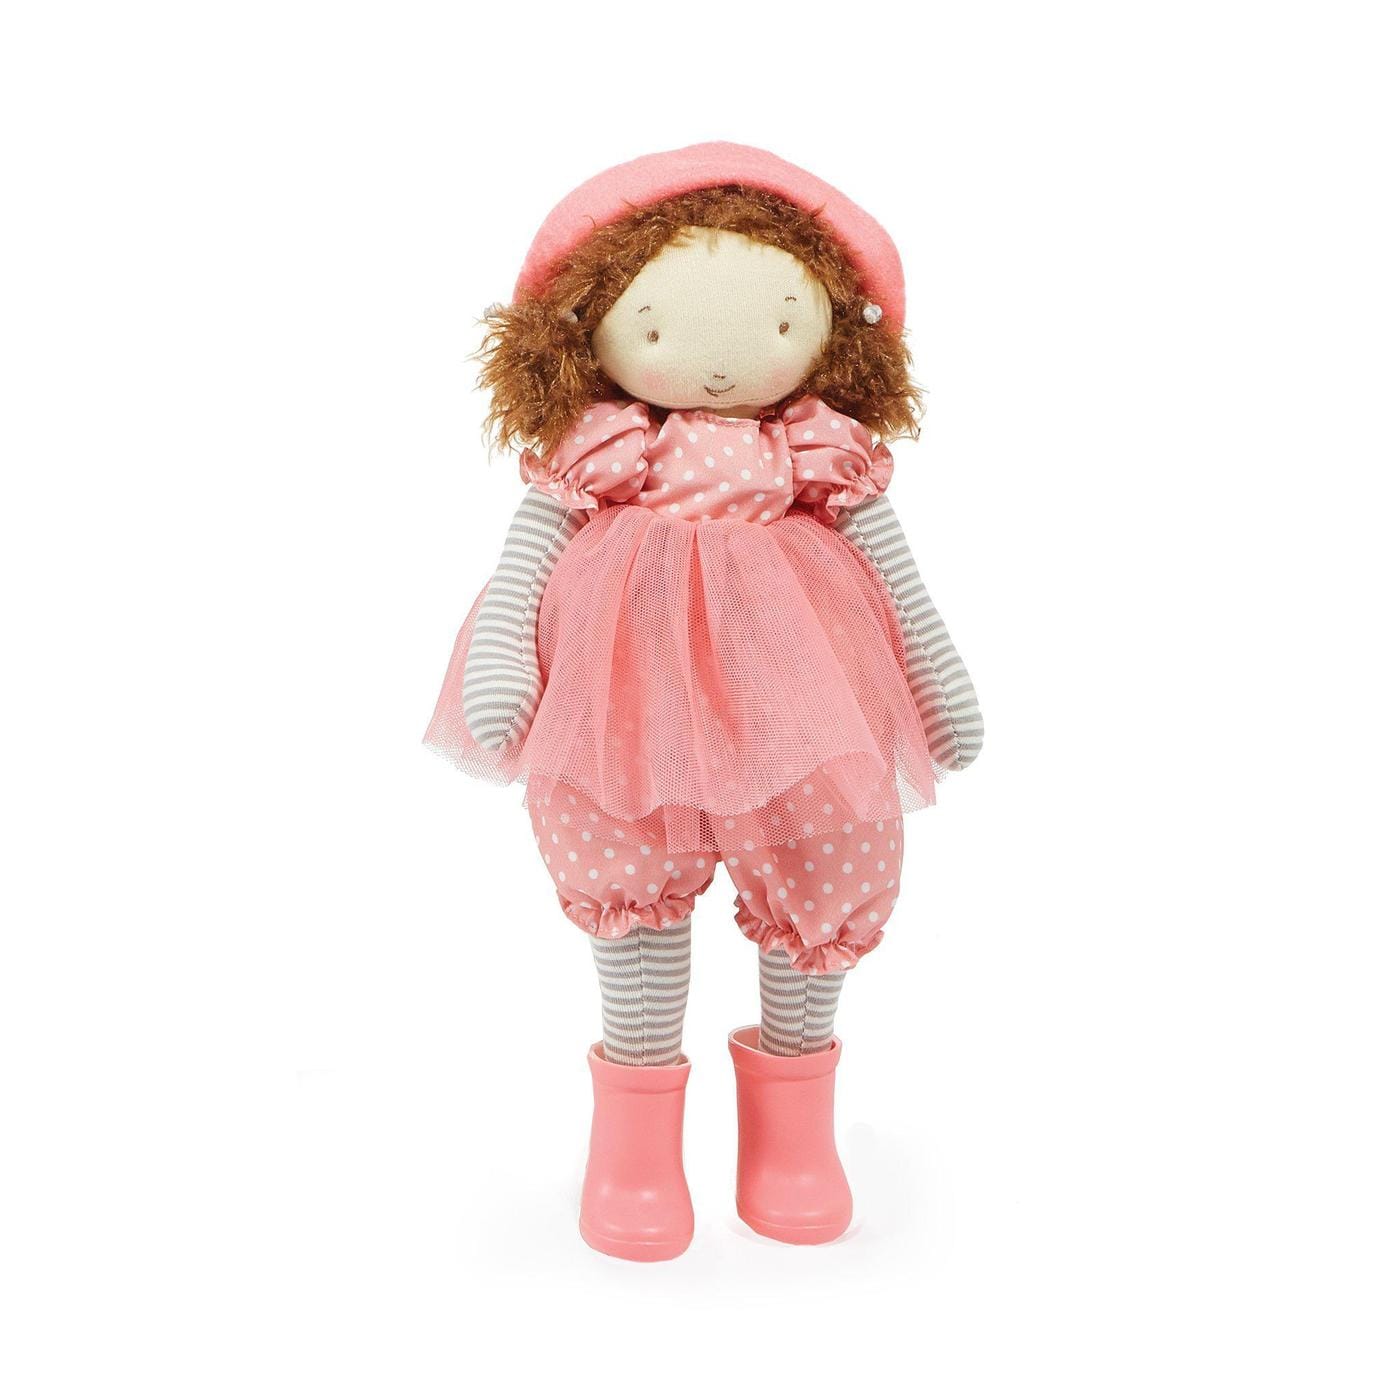 Bunnies By The Bay Bunnies By The Bay Daisy Pretty Girl Plush Doll - Little Miss Muffin Children & Home